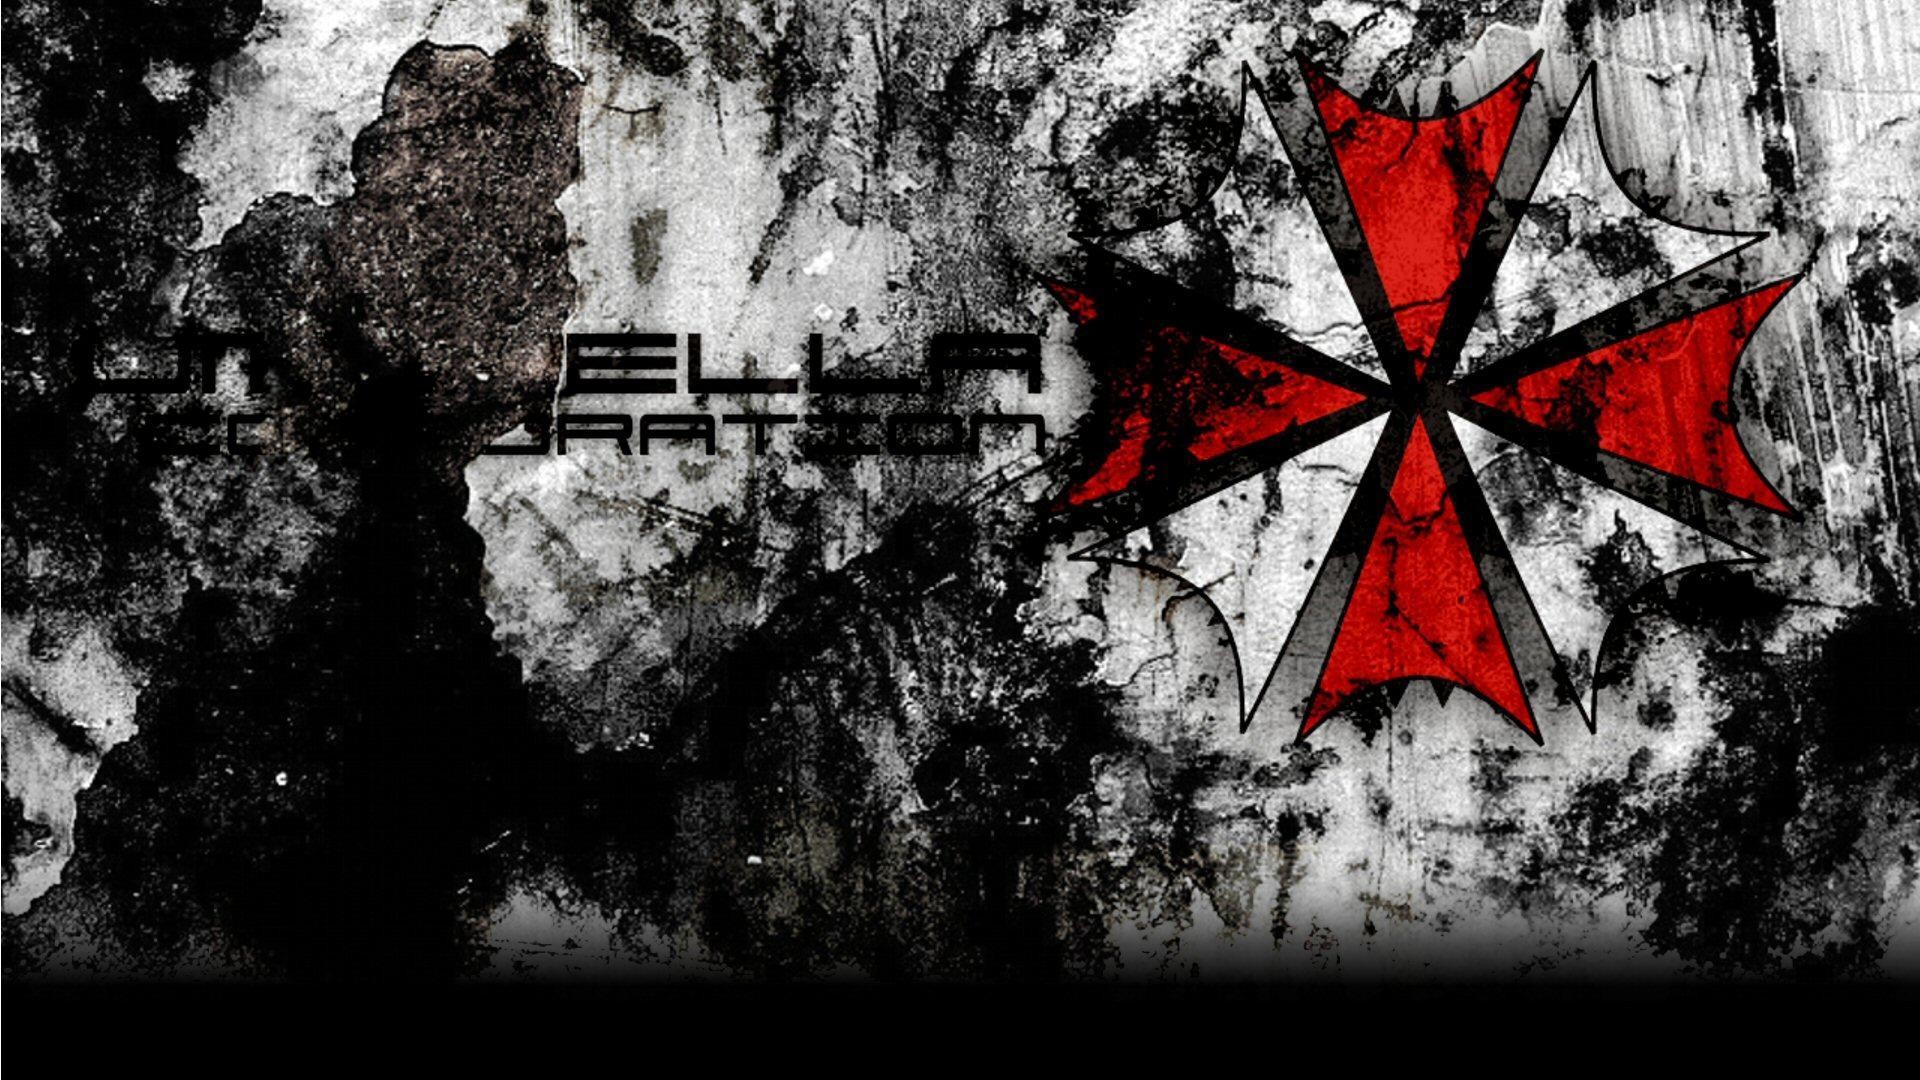 1920x1080 Related Wallpapers. Company Umbrella Corporation